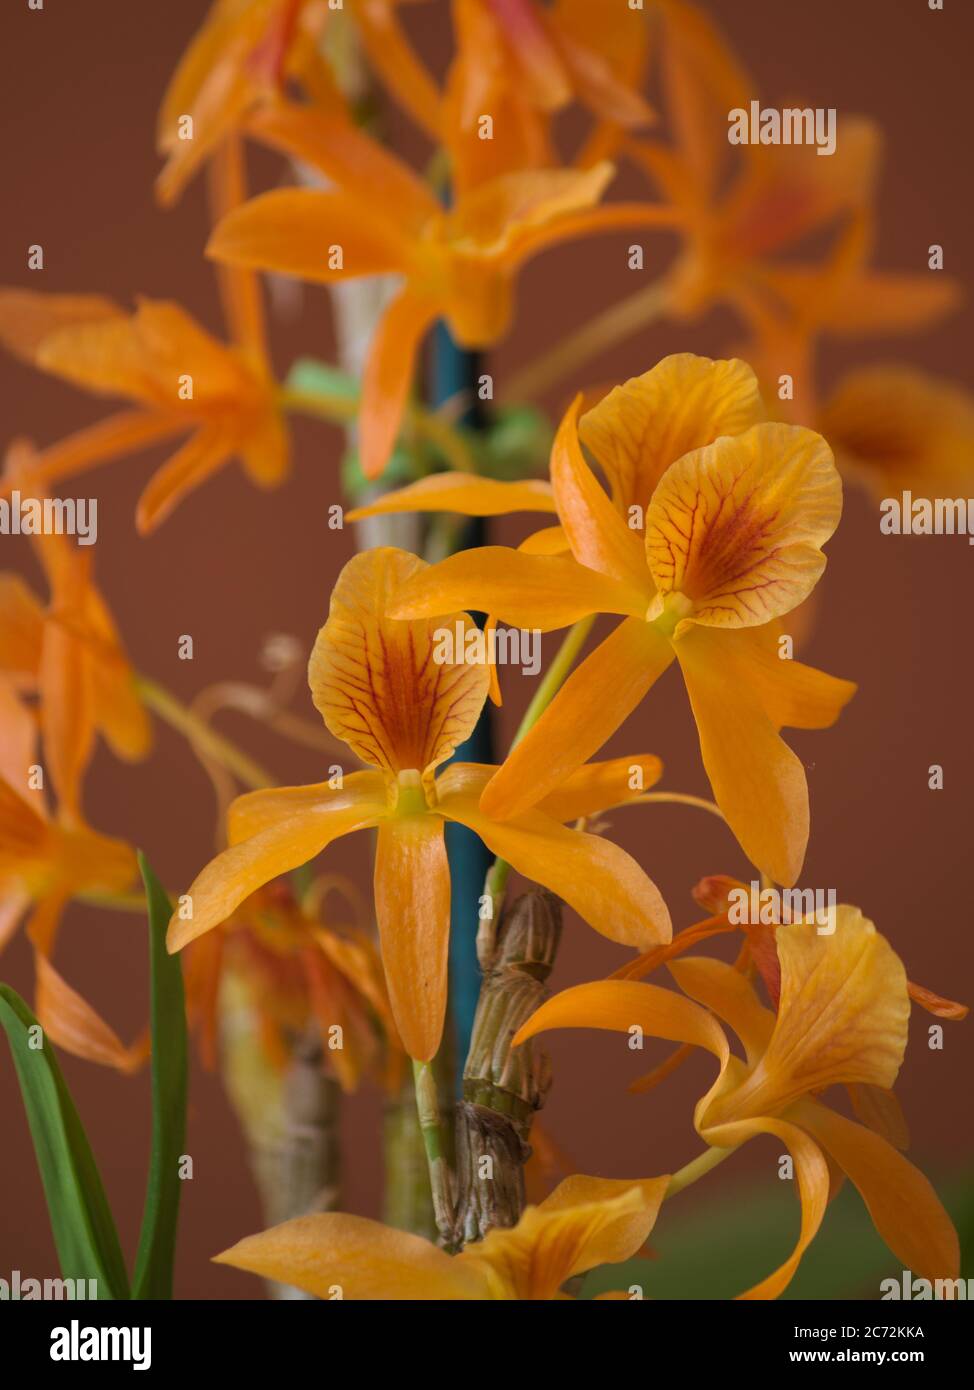 Orchid branch with orange petal flowers with red details. Stock Photo